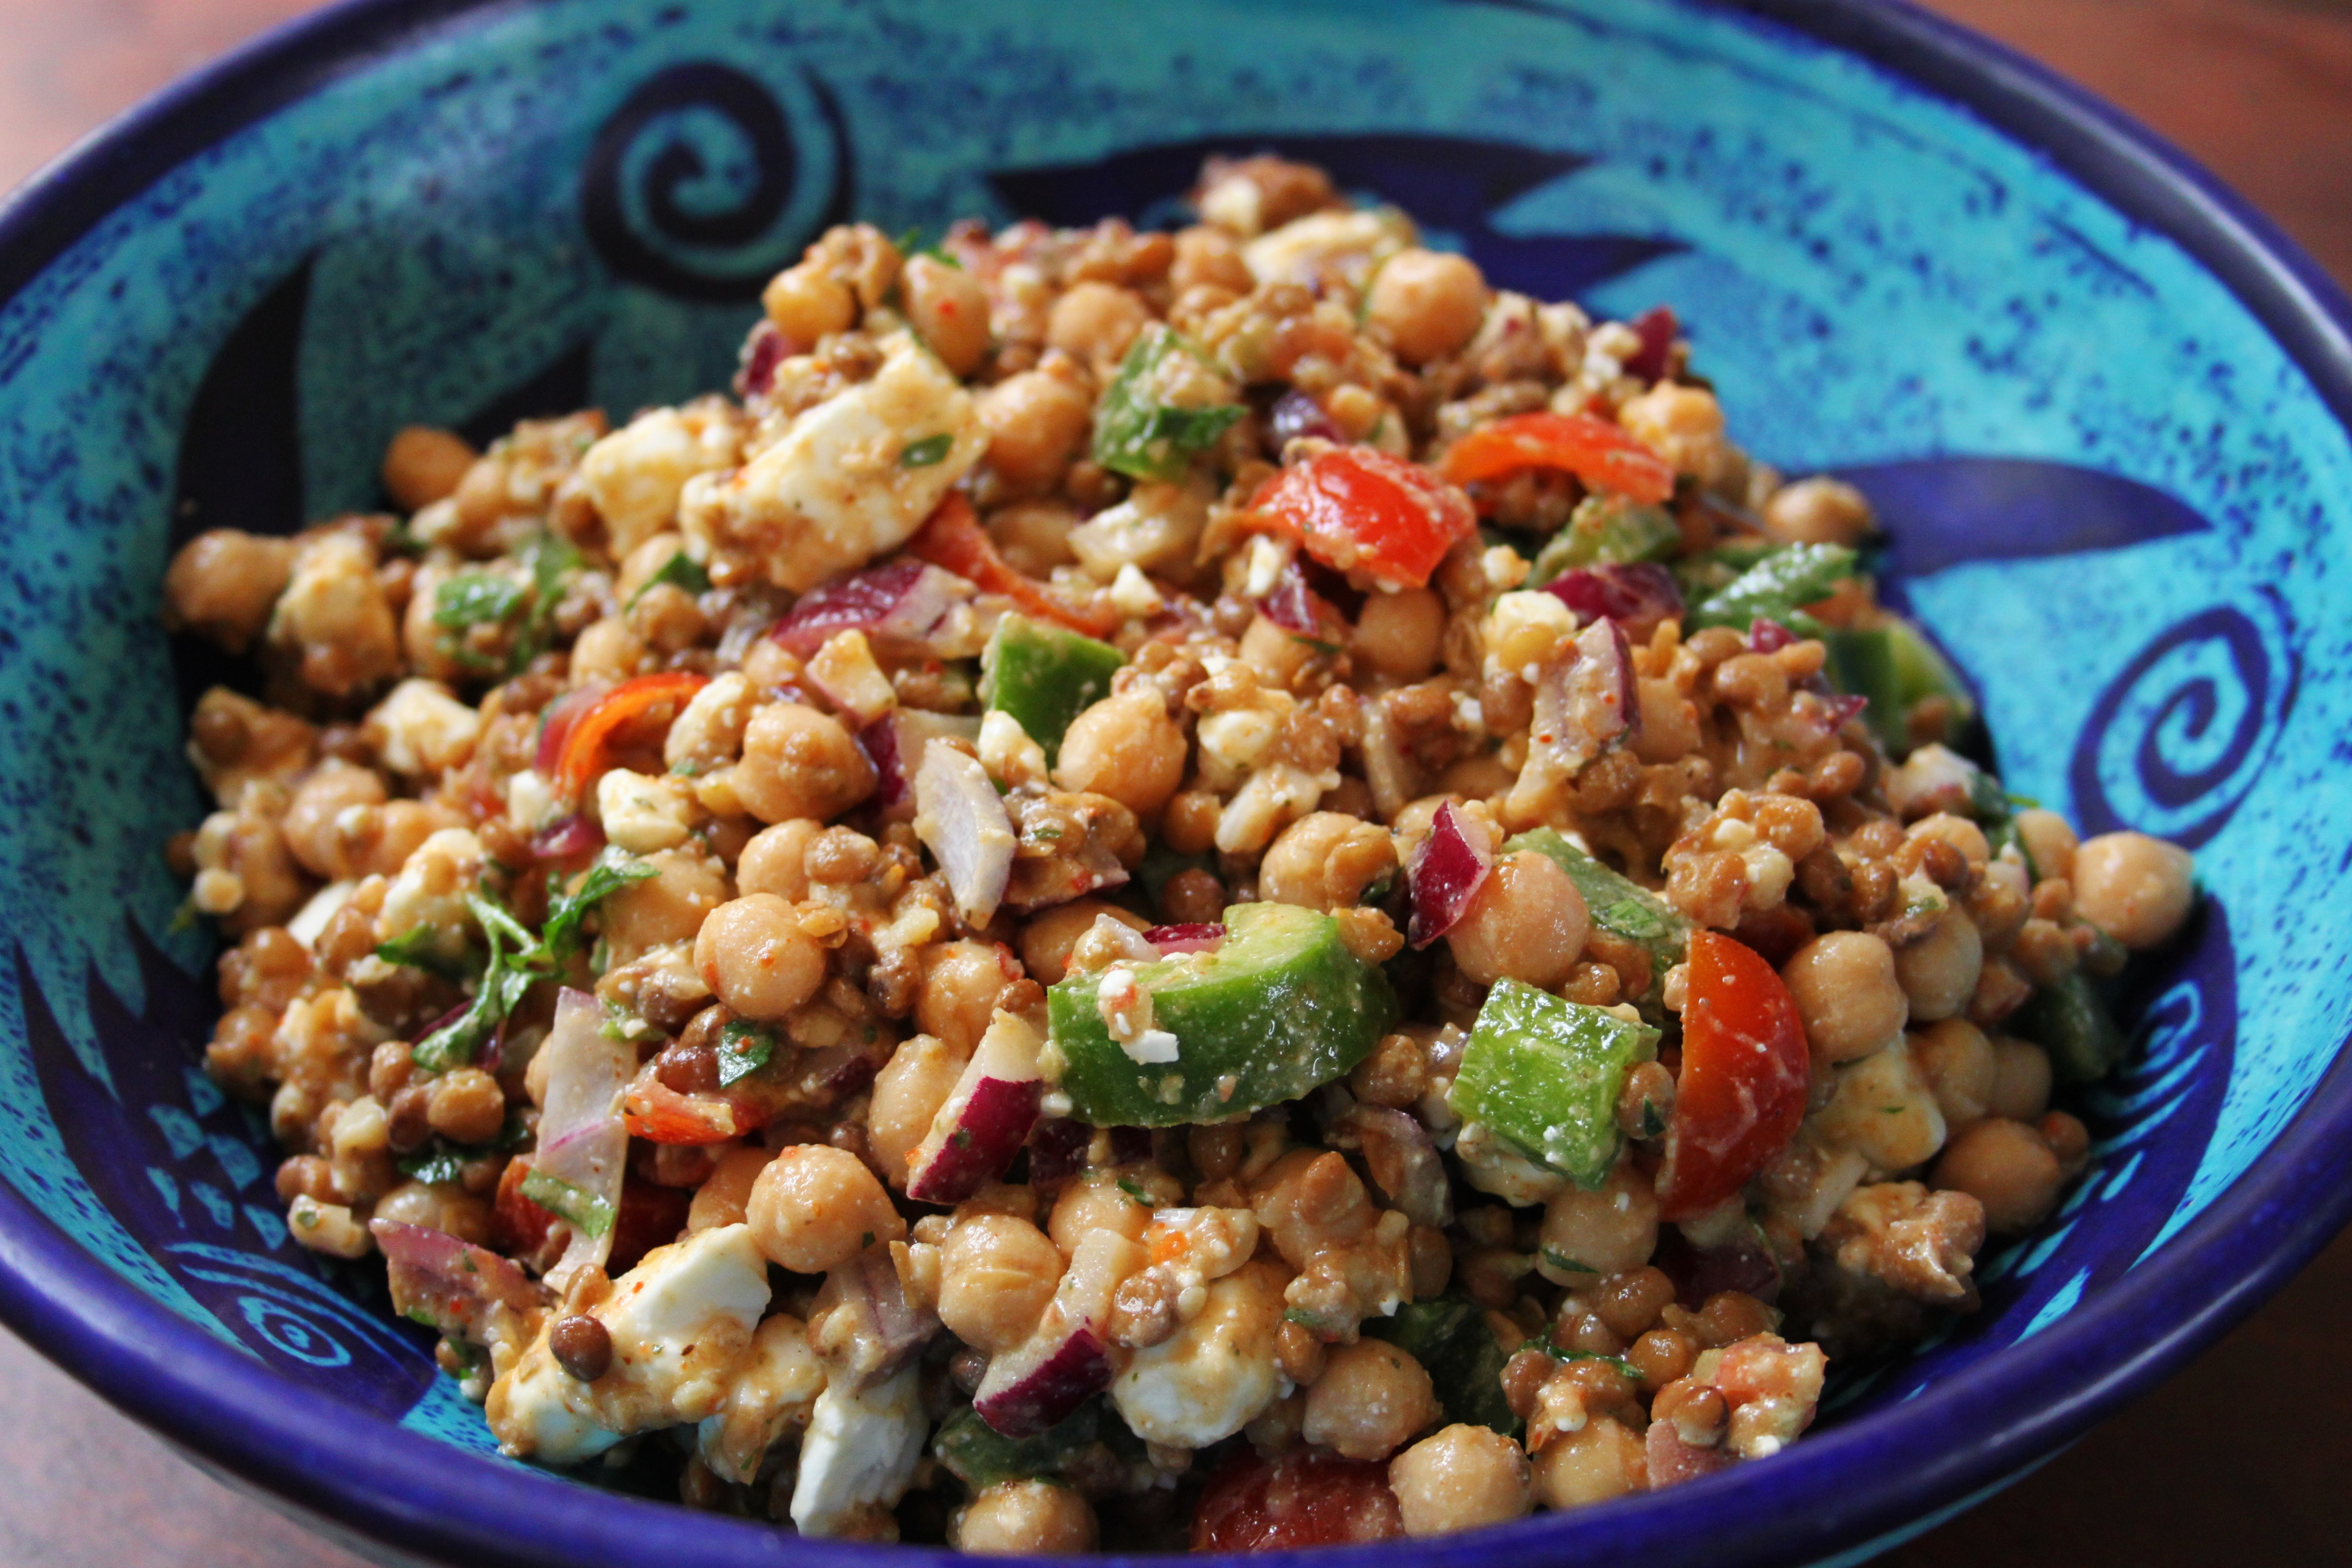 Tasty Healthy Lunches
 Today’s healthy and delicious lunch idea Chickpea lentil